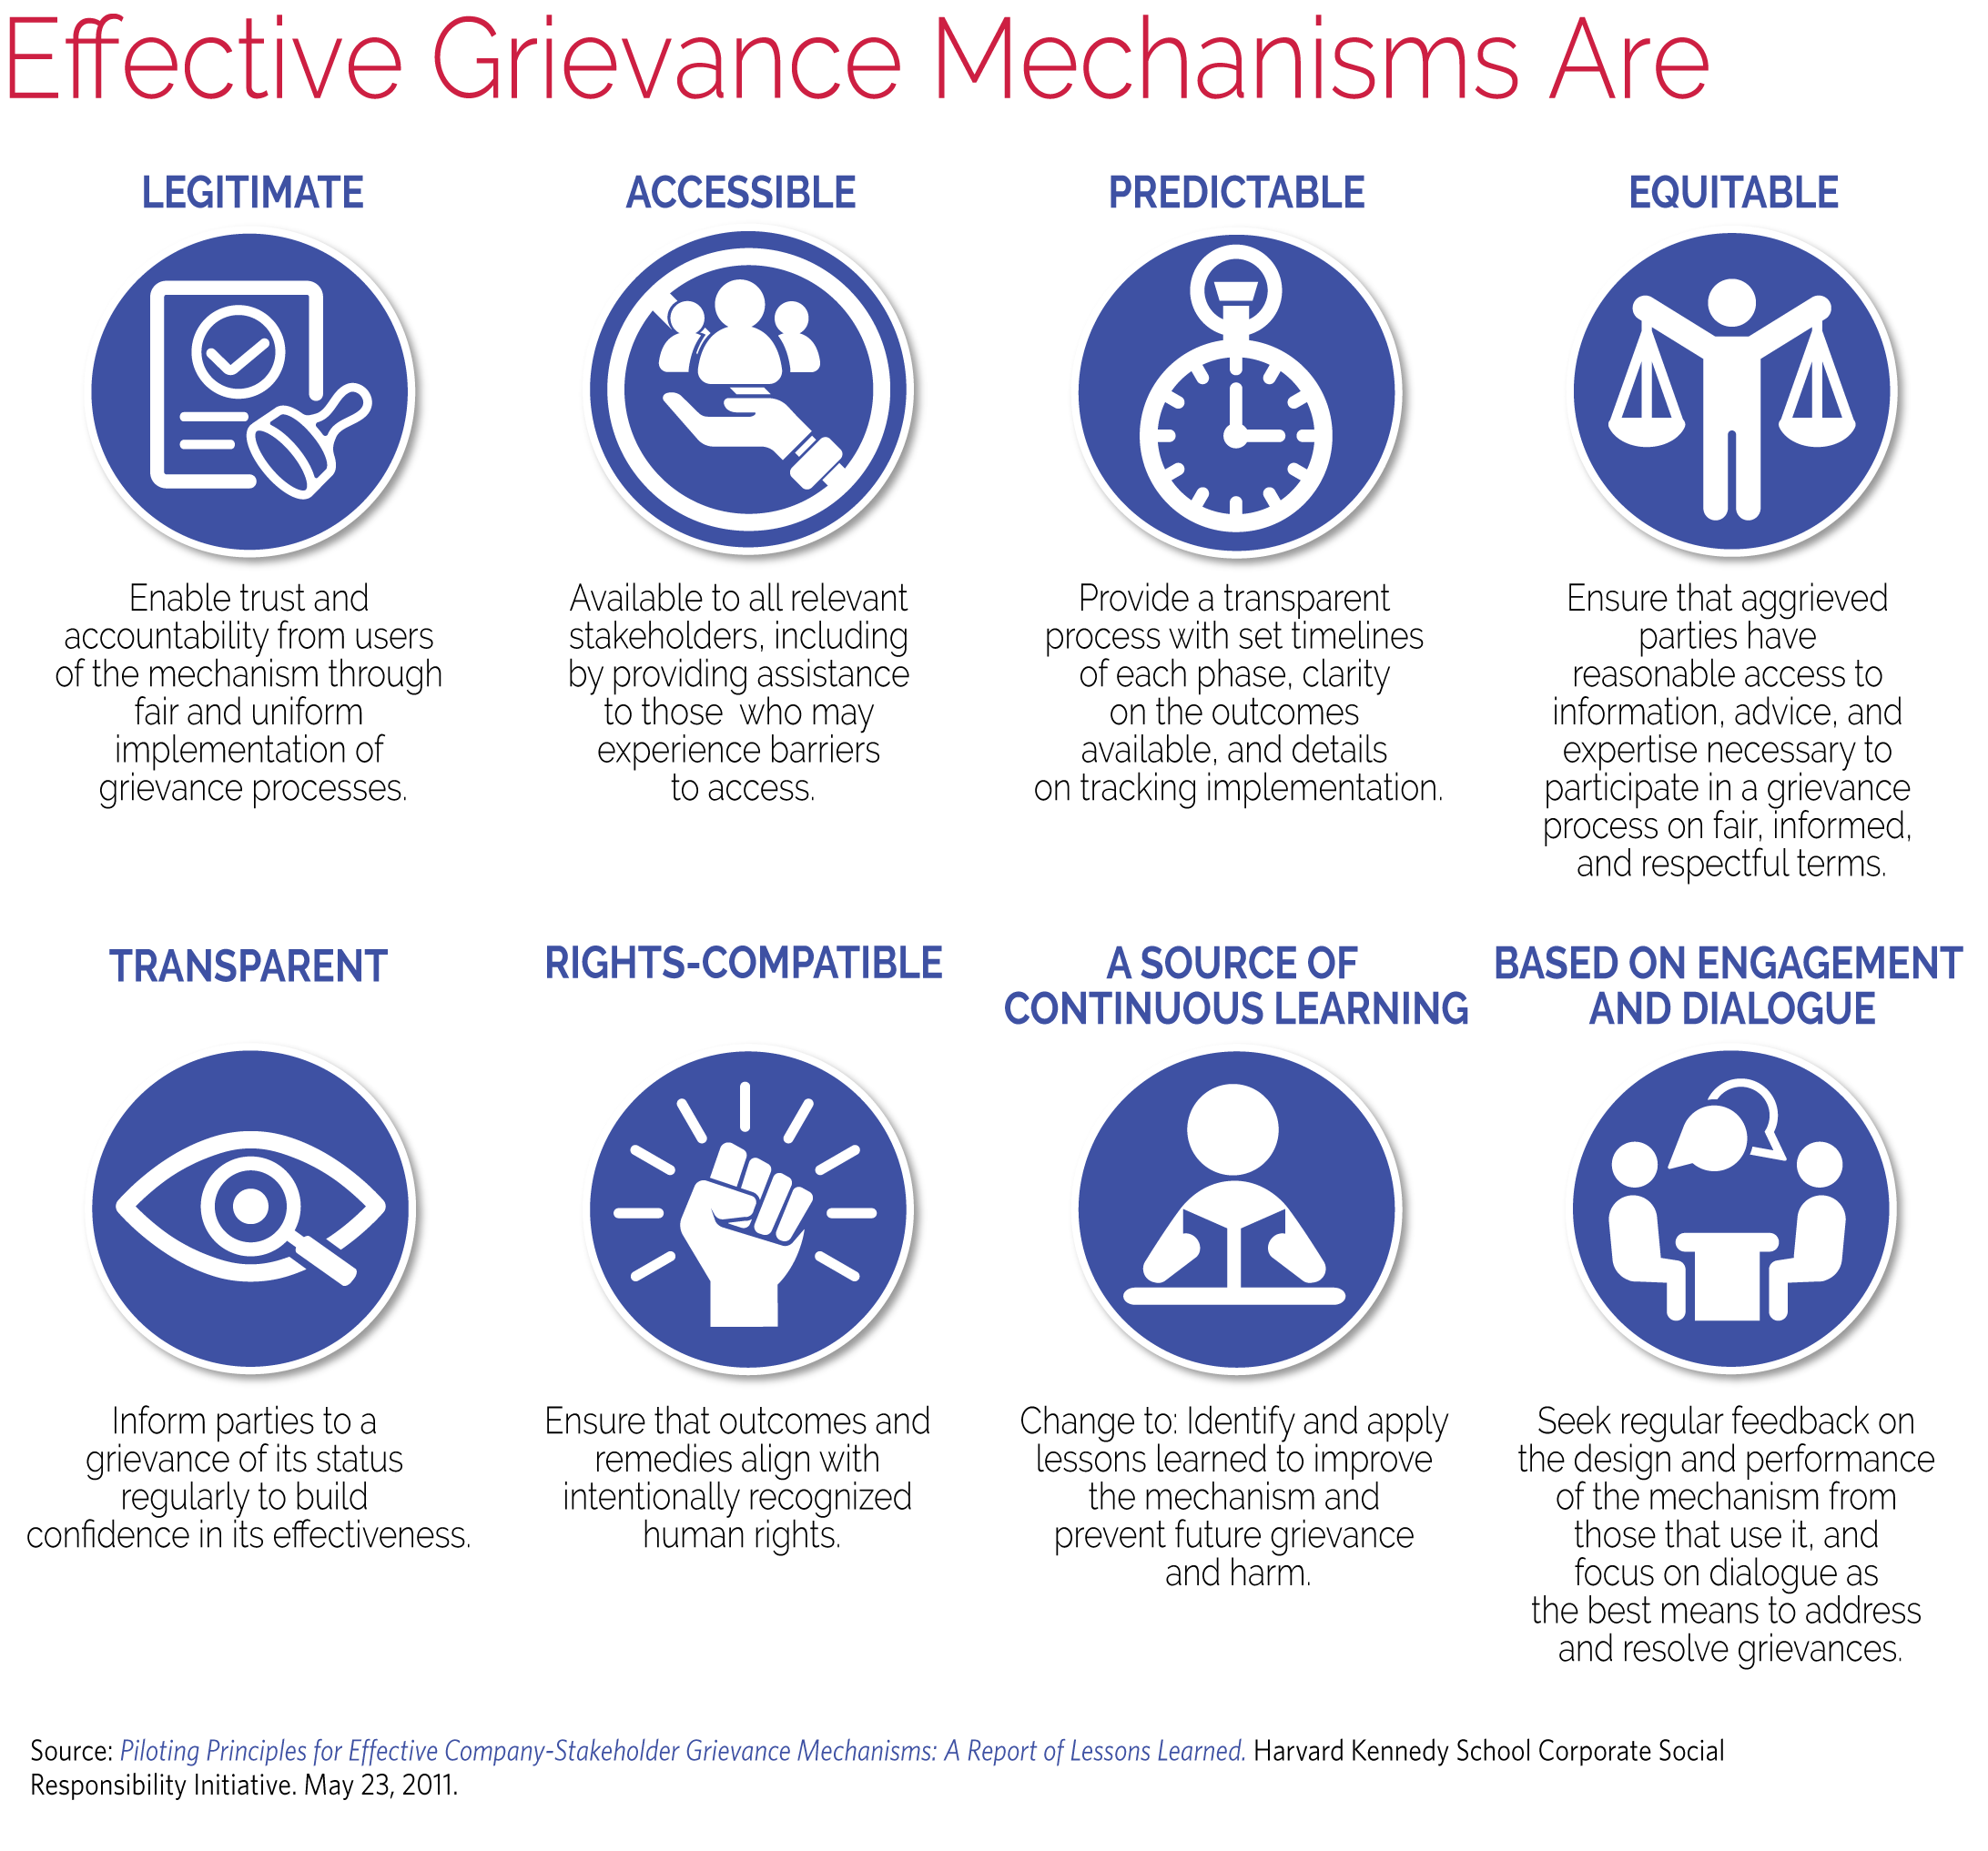 A graphic that displays 8 descriptors of effective grievance mechanisms, including legitimacy and accessibility